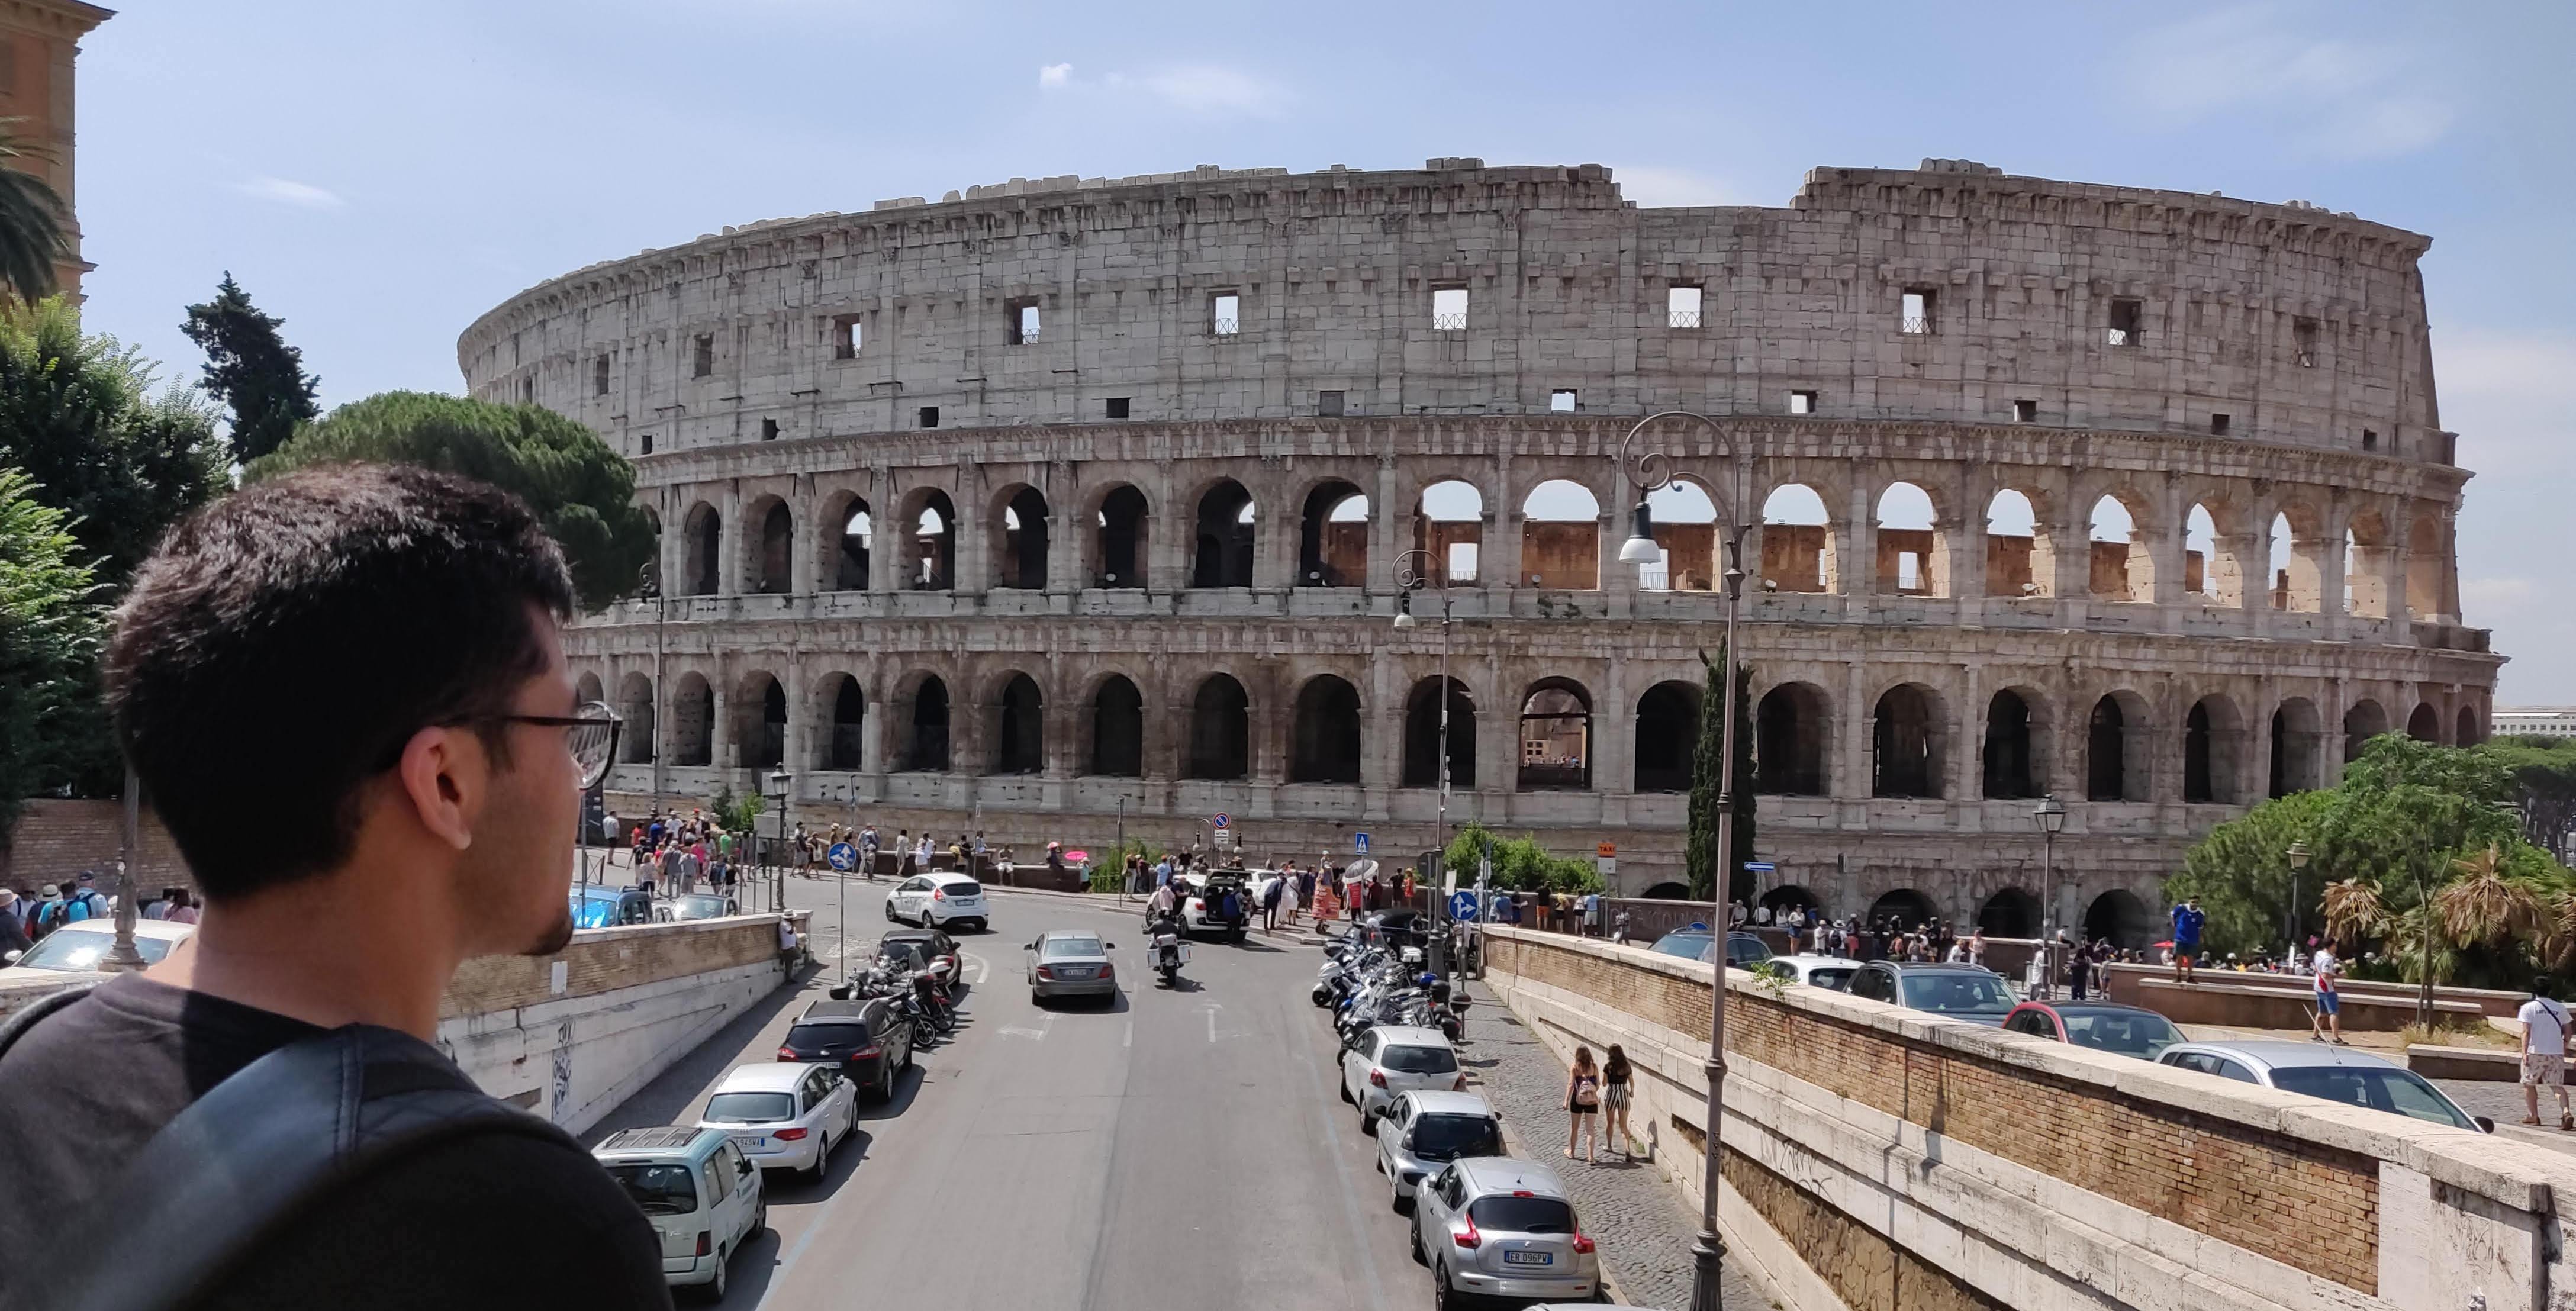 At the Roman Colosseum